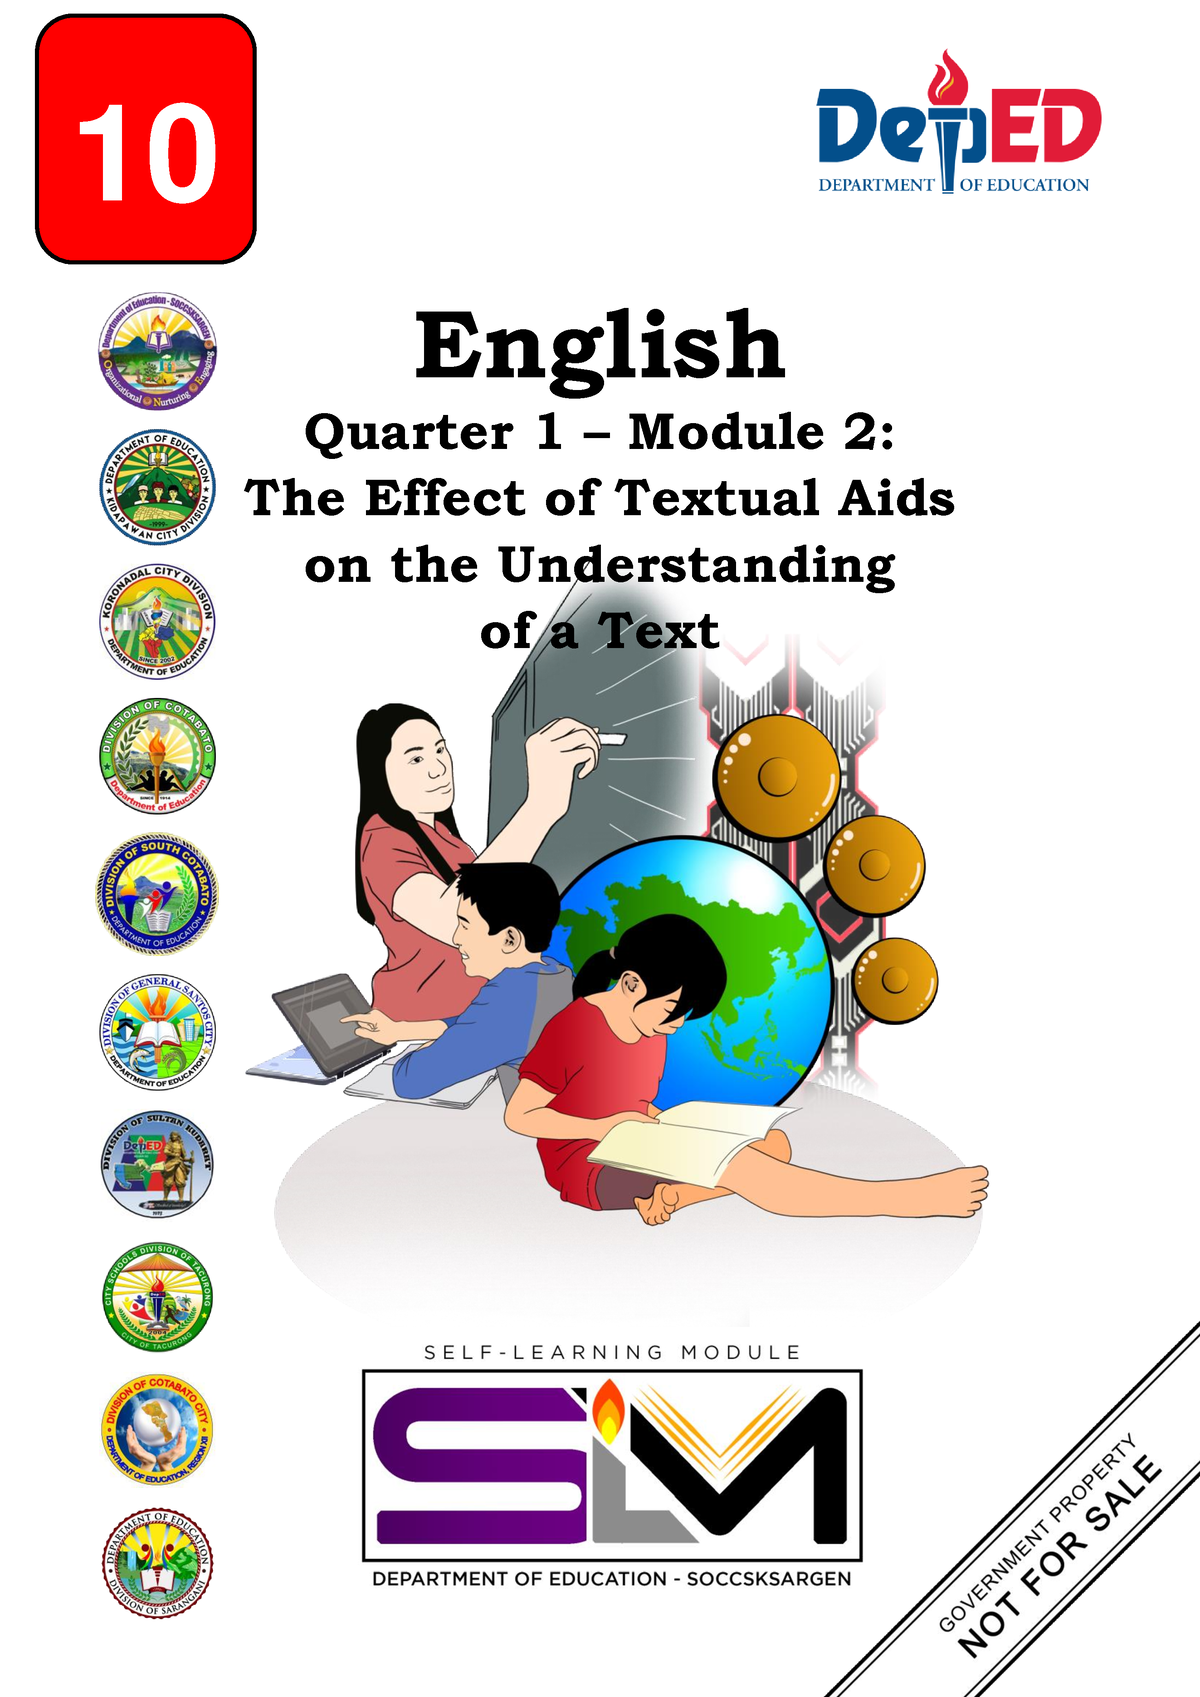 English 10 Quarter 1 Module 2 English Quarter 1 Module 2 The Effect Of Textual Aids On The 6082